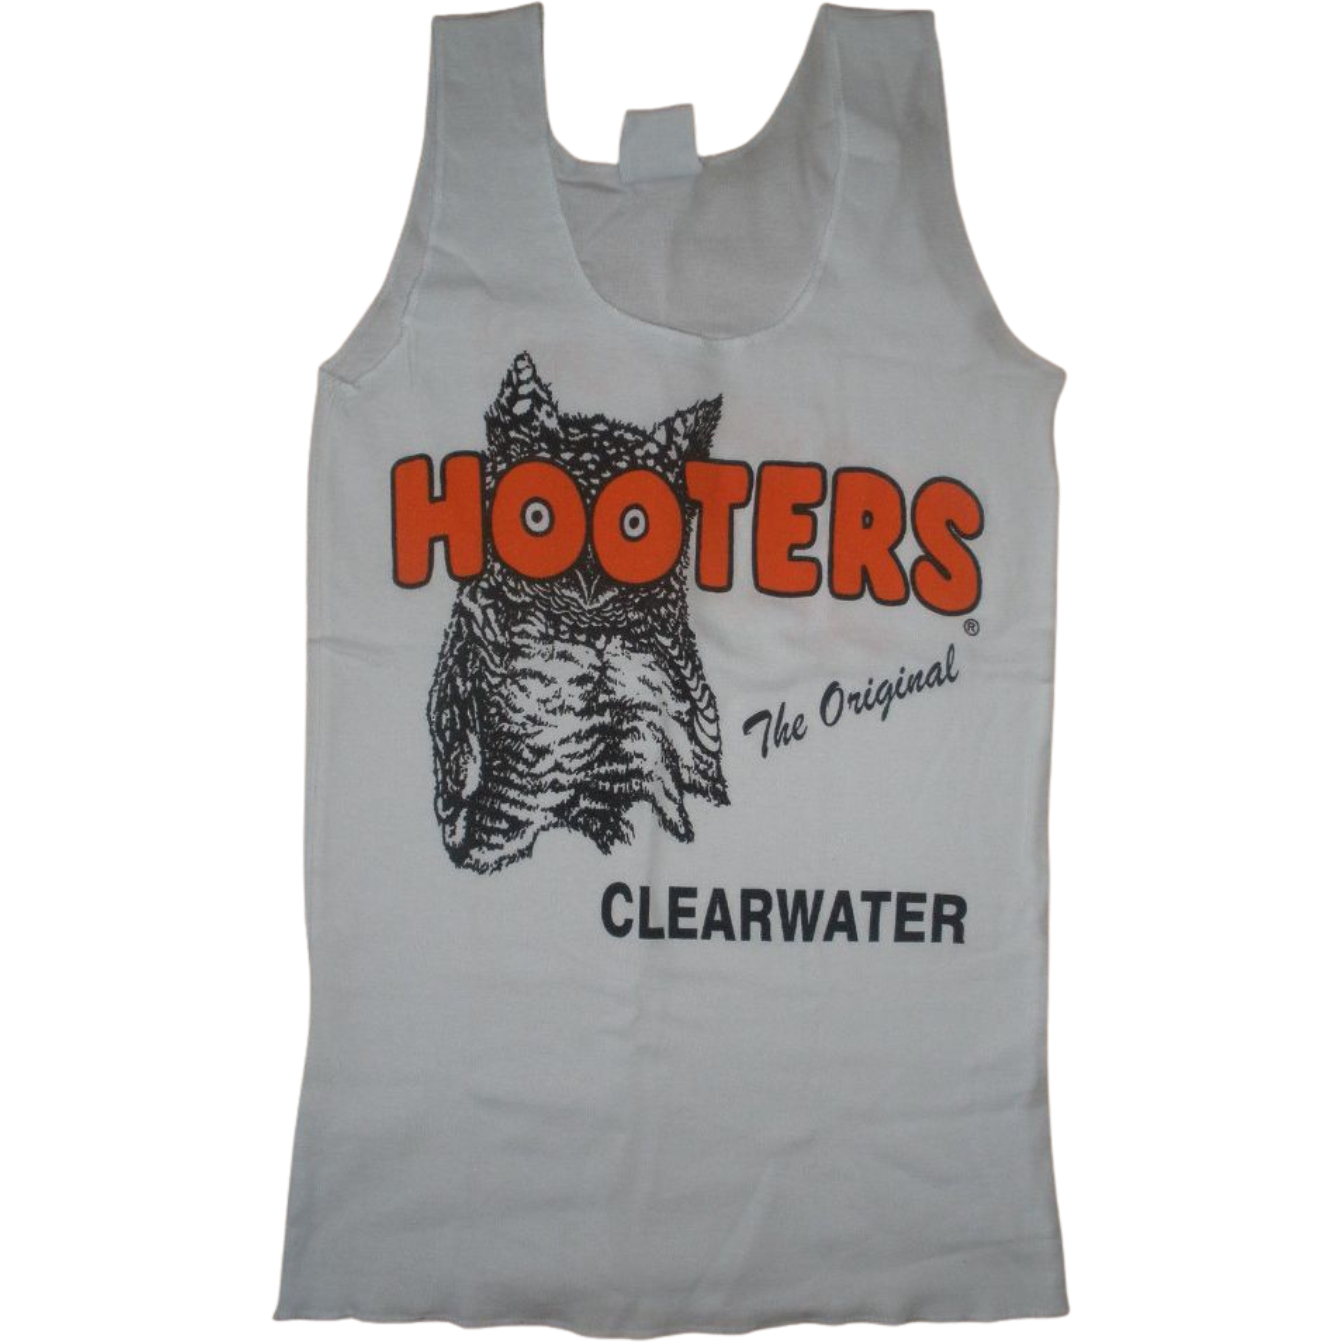 Clearwater Hooters White Tank Top Outfit Costume - Hootrsnhose